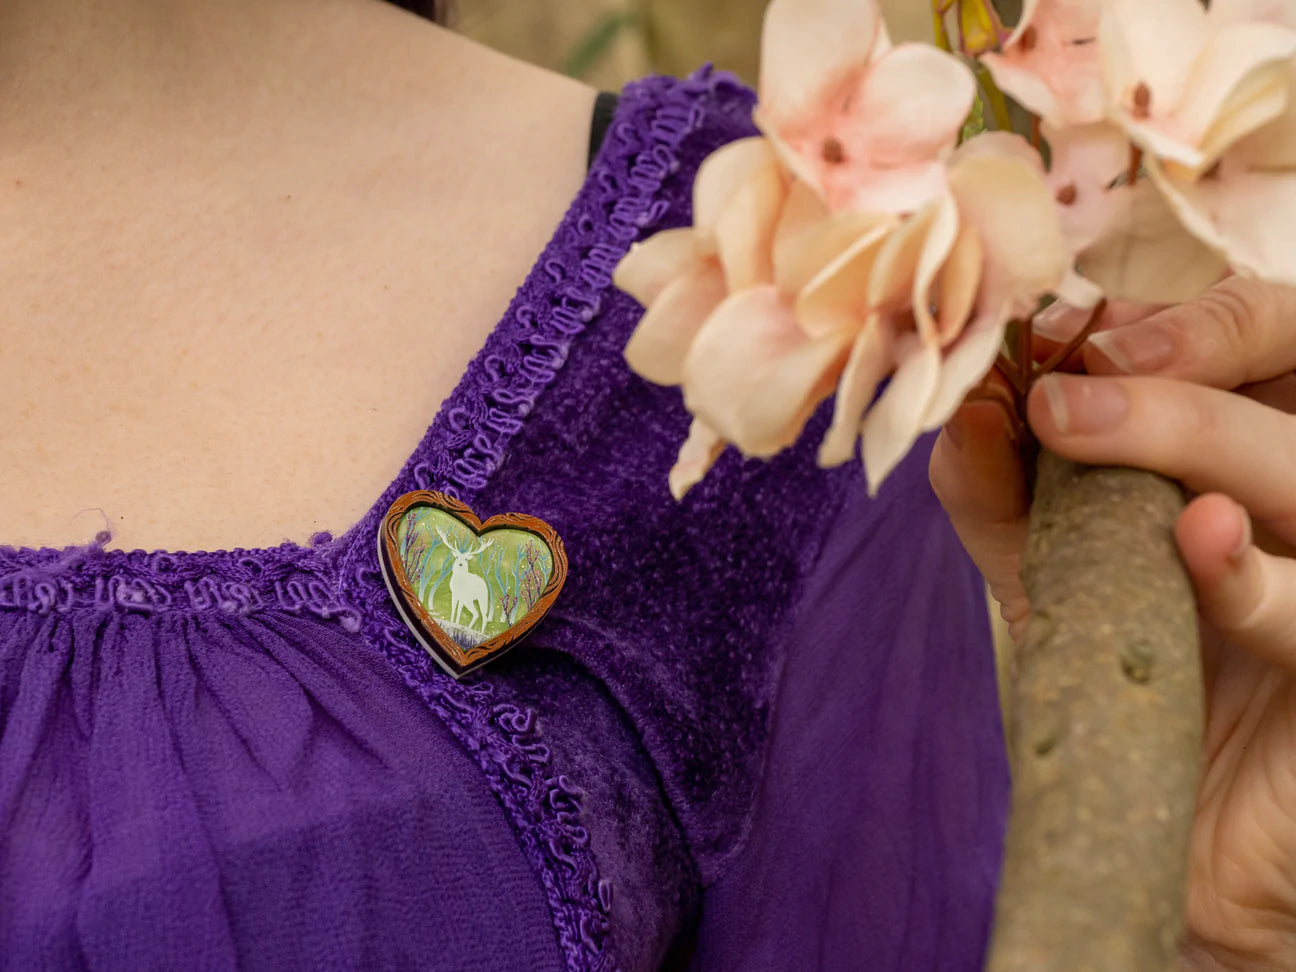 HEART OF THE FOREST MINI BROOCH